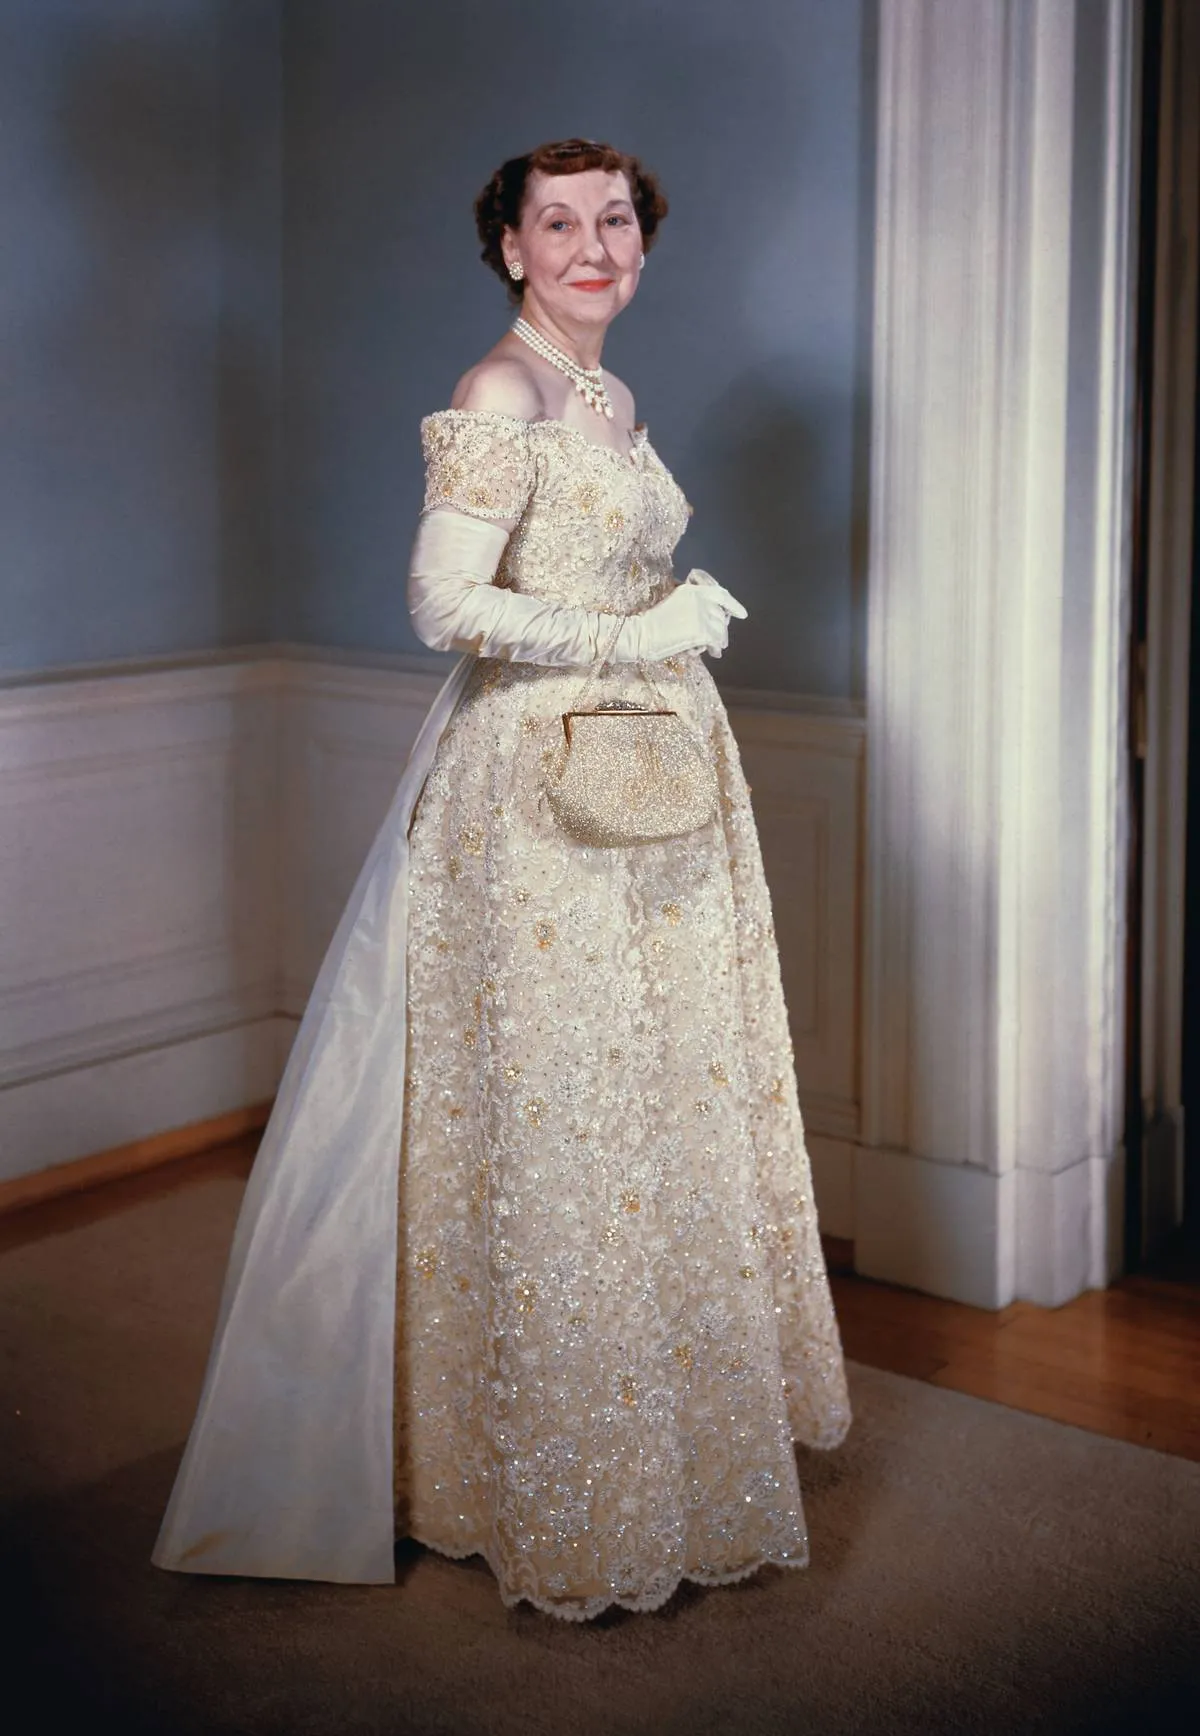 Mamie Eisenhower poses in her 1957 inaugural gown.